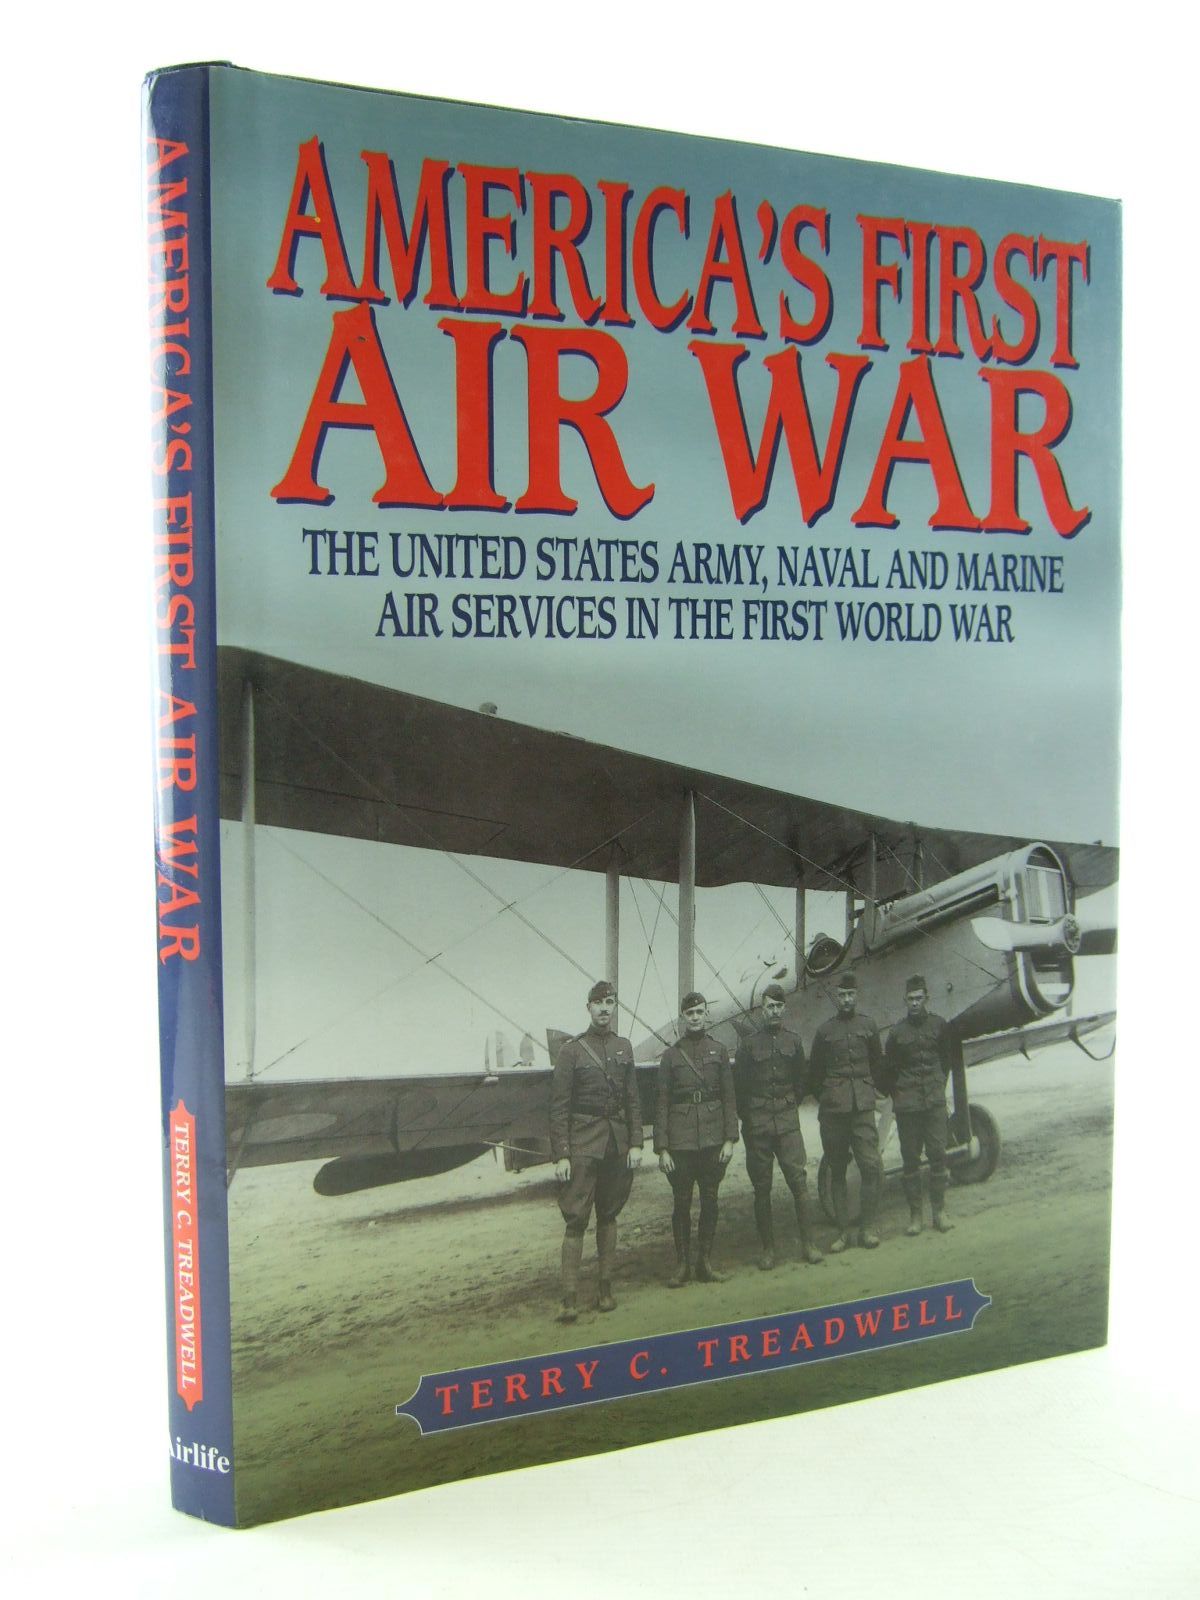 Photo of AMERICA'S FIRST AIR WAR written by Treadwell, Terry C. published by Airlife (STOCK CODE: 2109060)  for sale by Stella & Rose's Books